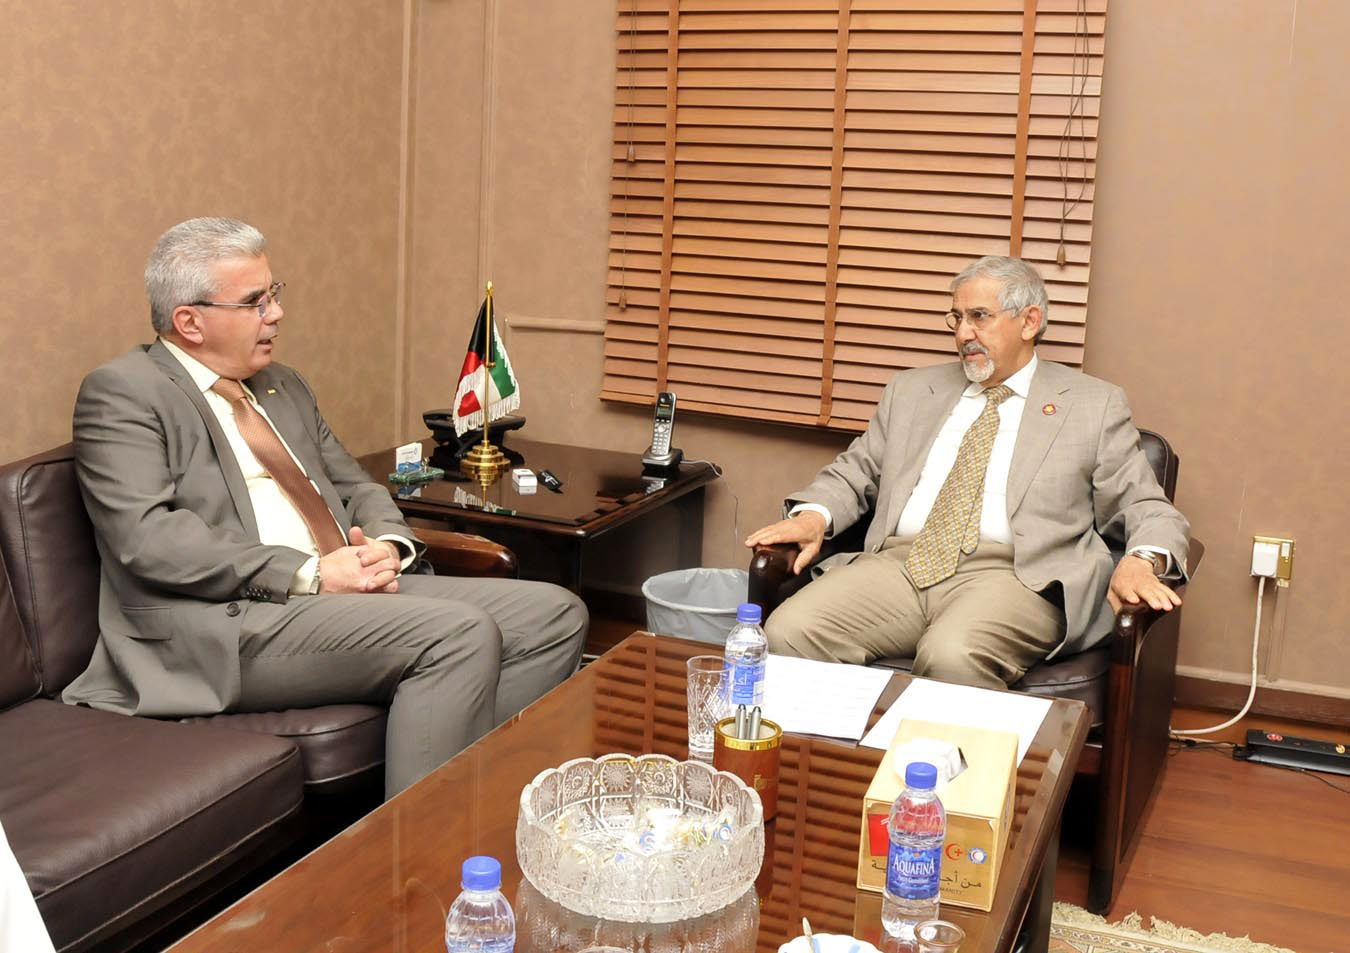 Chairman of the Board of Directors of the Kuwait Red Crescent Society (KRCS) Dr. Hilal Al-Sayer receives Palestinian Ambassador to Kuwait Rami Tahboub